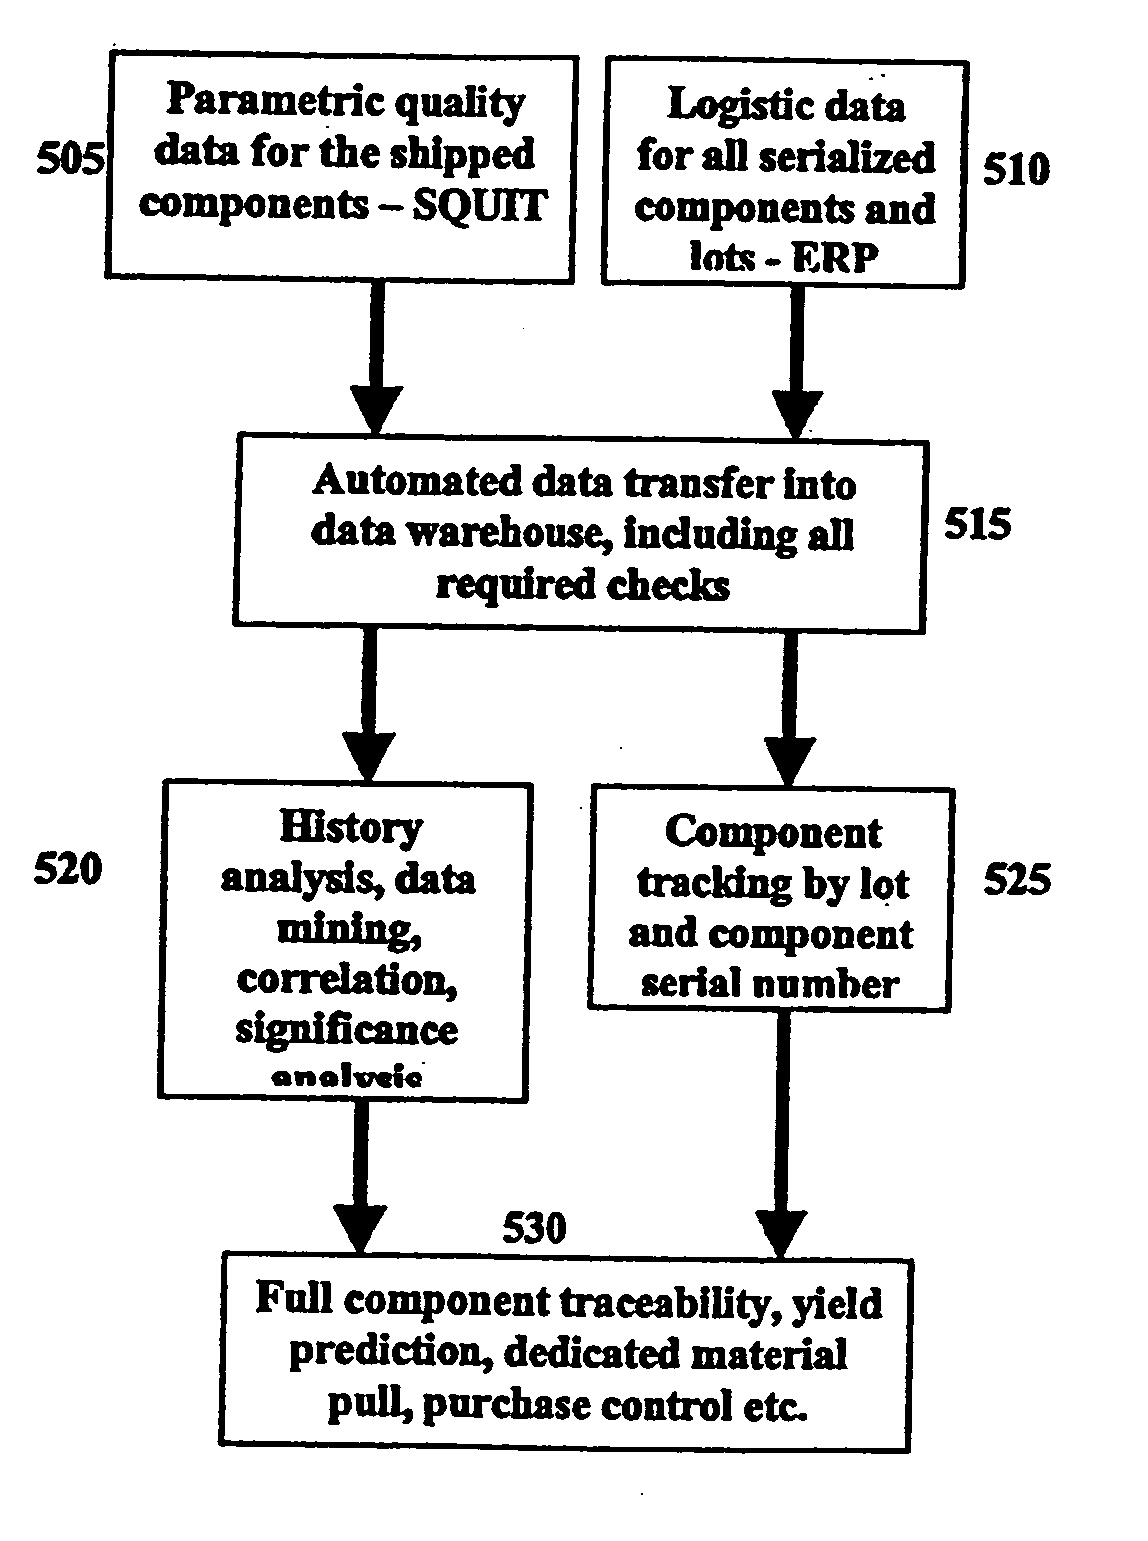 Method and system for computerizing quality management of a supply chain